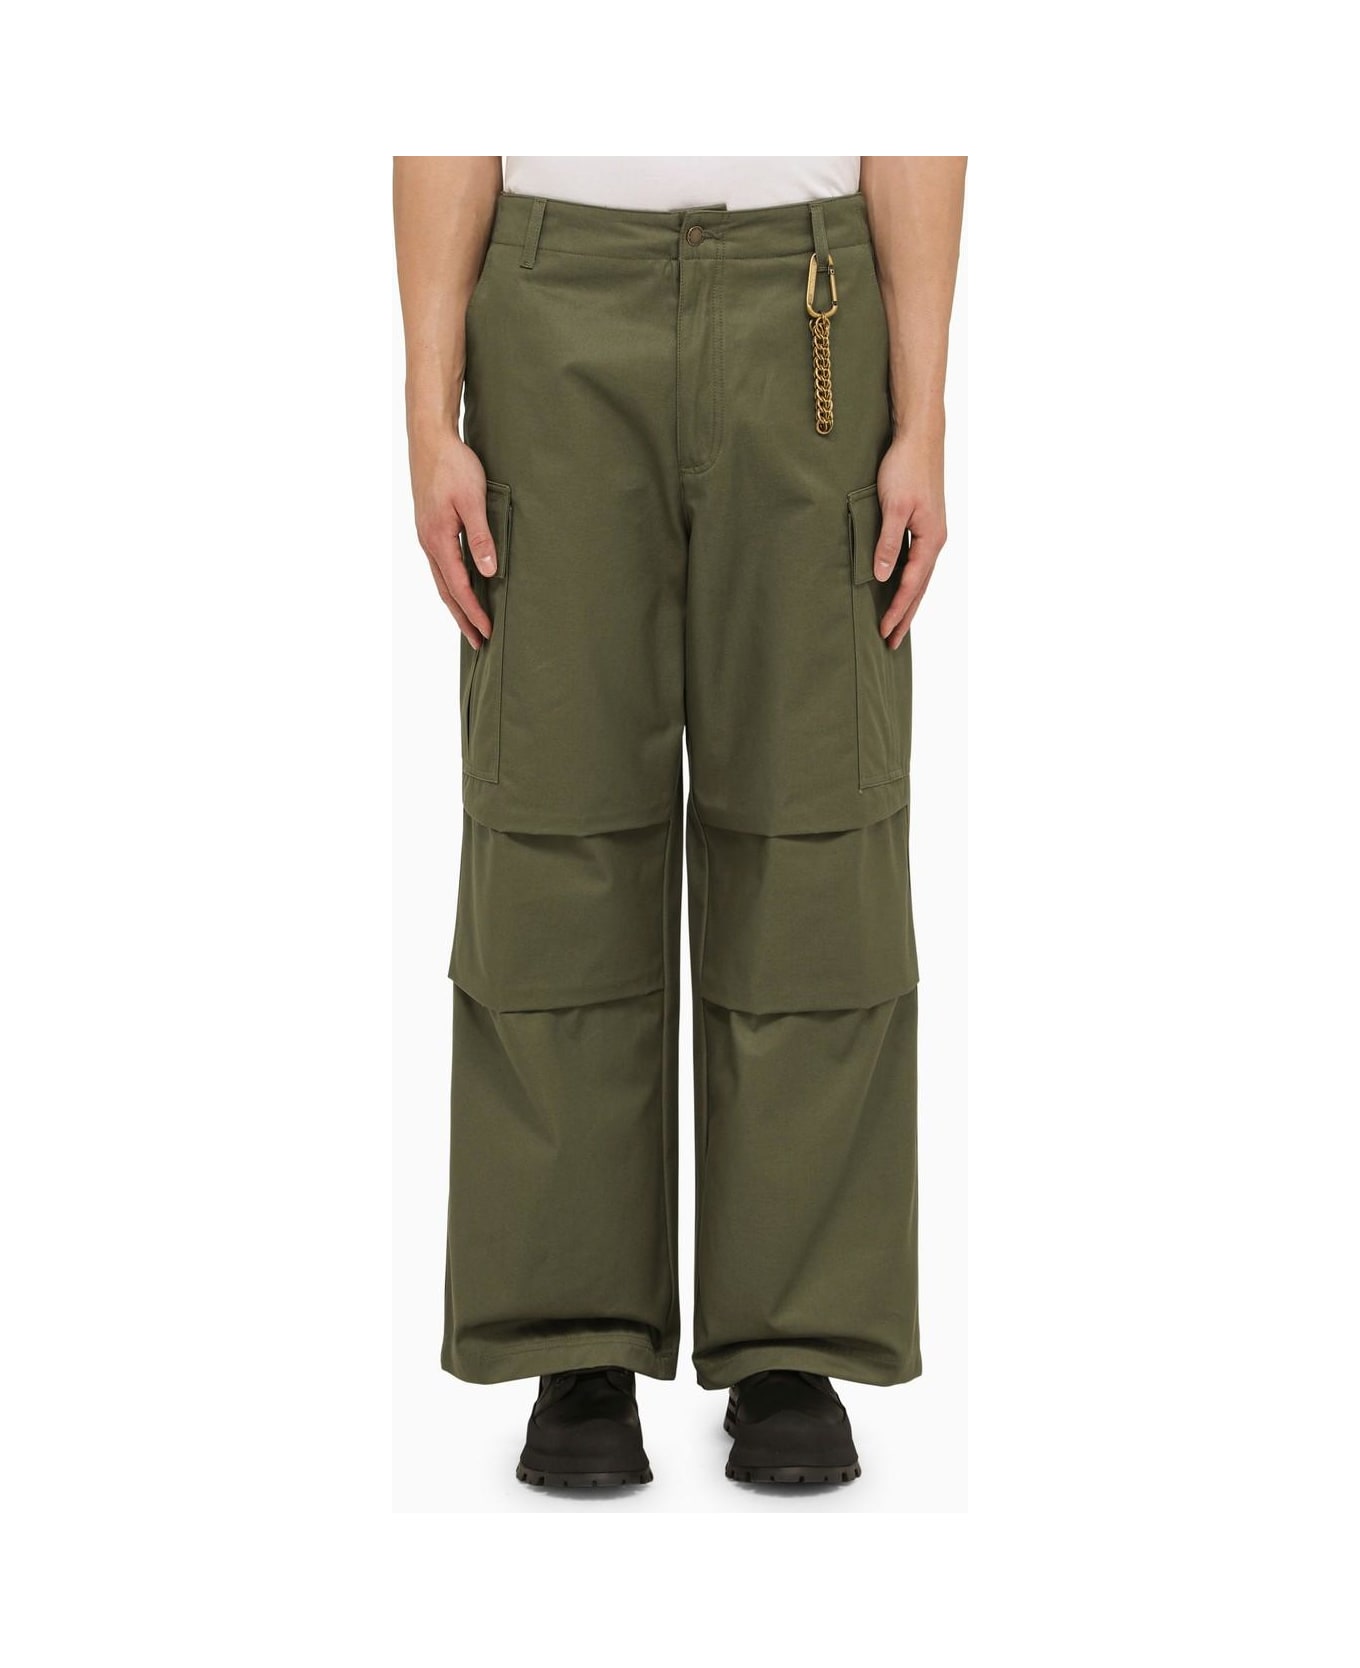 DARKPARK Military Green Vince Cargo Trousers - Green